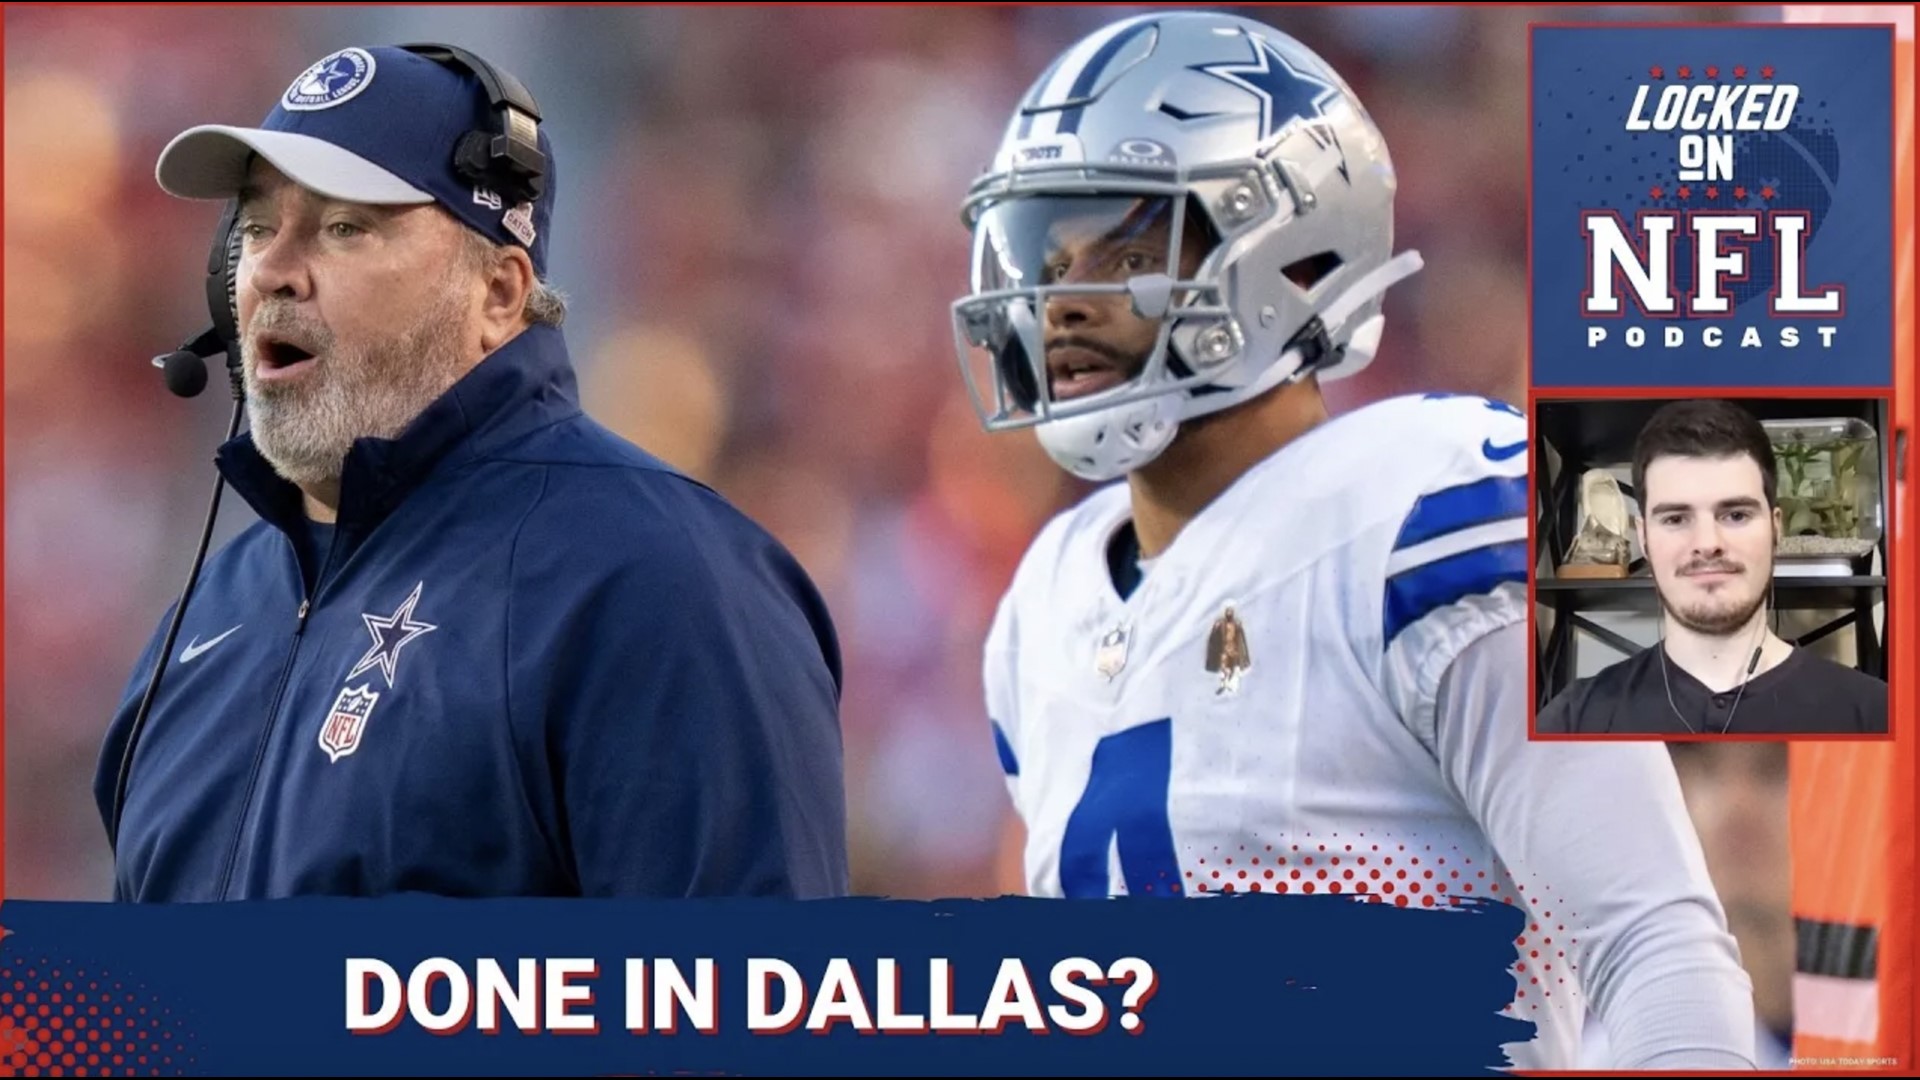 We look at whether Mike McCarthy and Dak Prescott are done in Dallas after the Cowboys' awful Wild Card loss to the Green Bay Packers